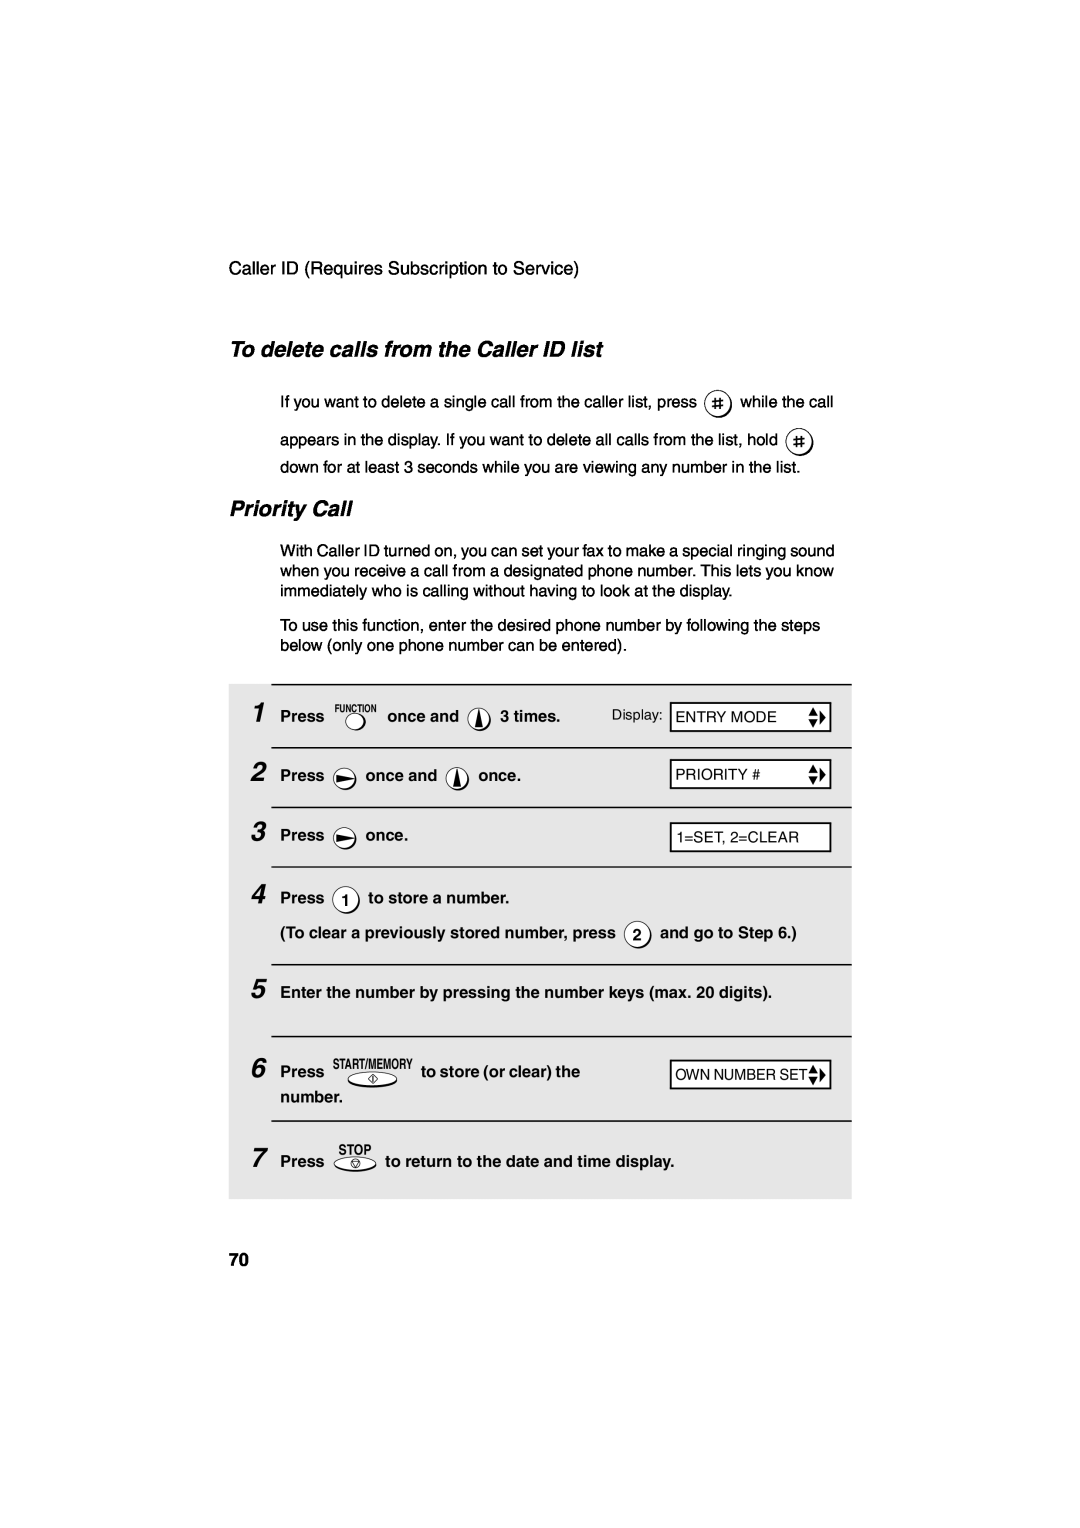 Sharp UX-A260 manual To delete calls from the Caller ID list, Priority Call, Own Number Set 